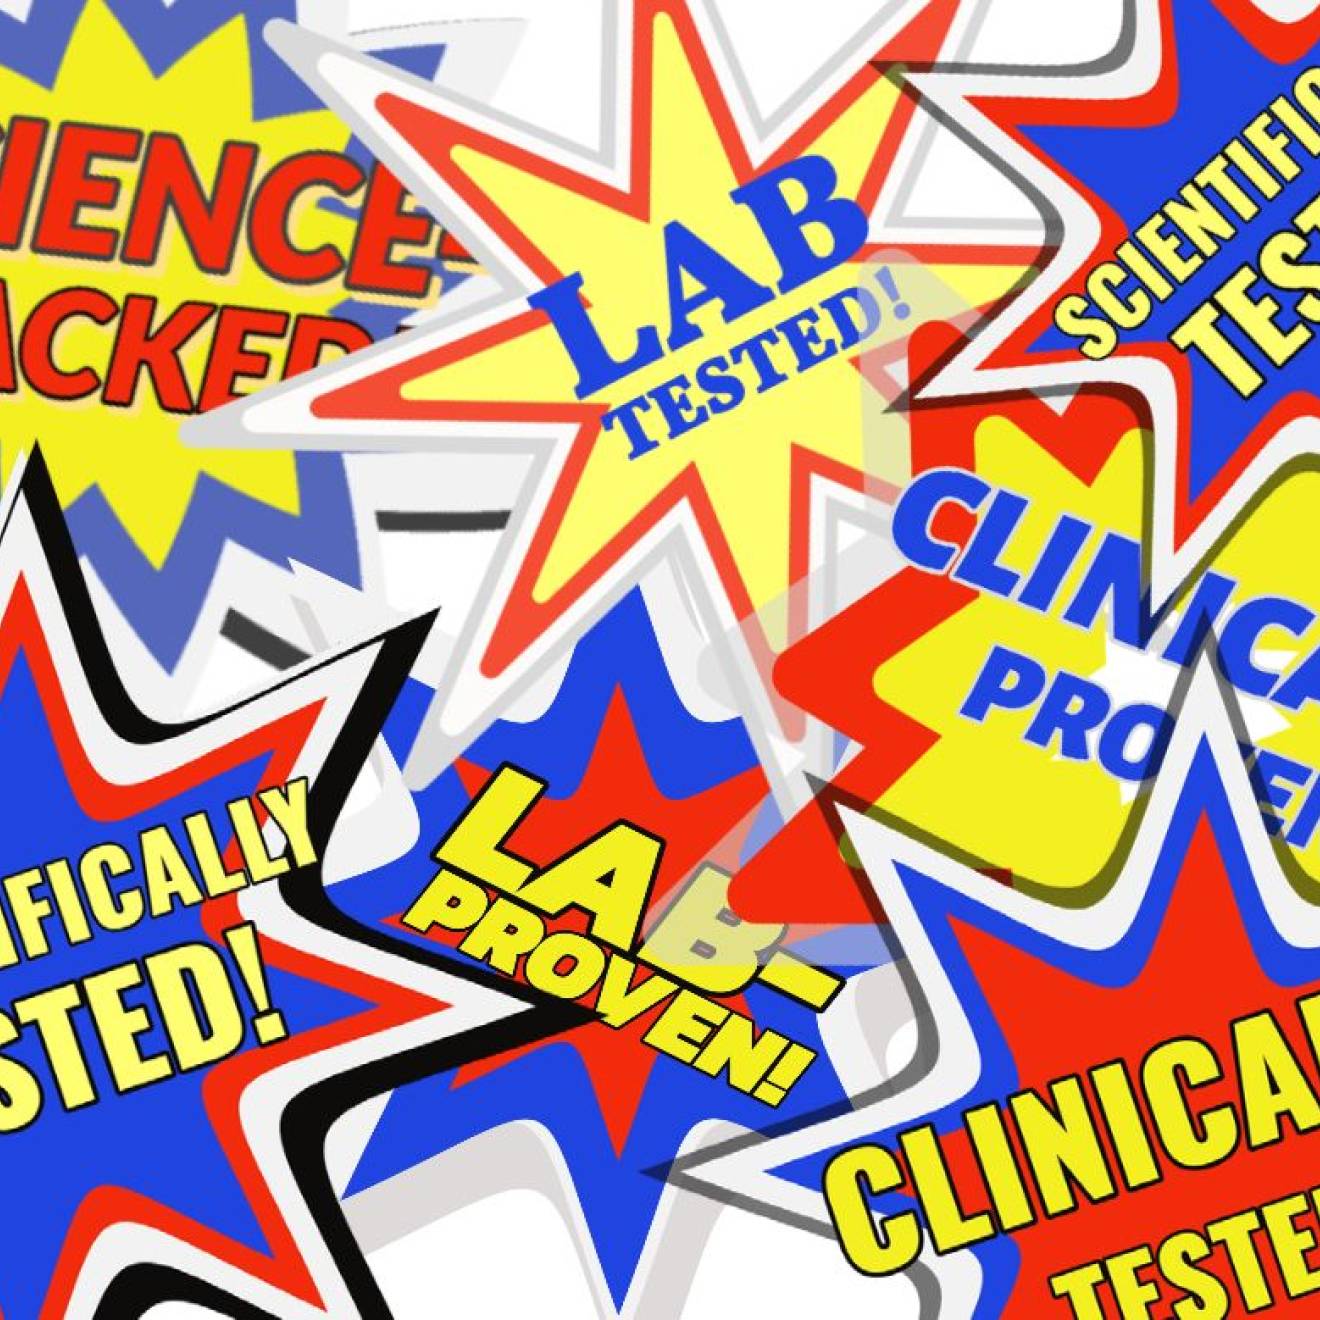 A collage of scientifically-tested and scientifically-proven oriented marketing slogans in bright blue and yellow sticker-like colors